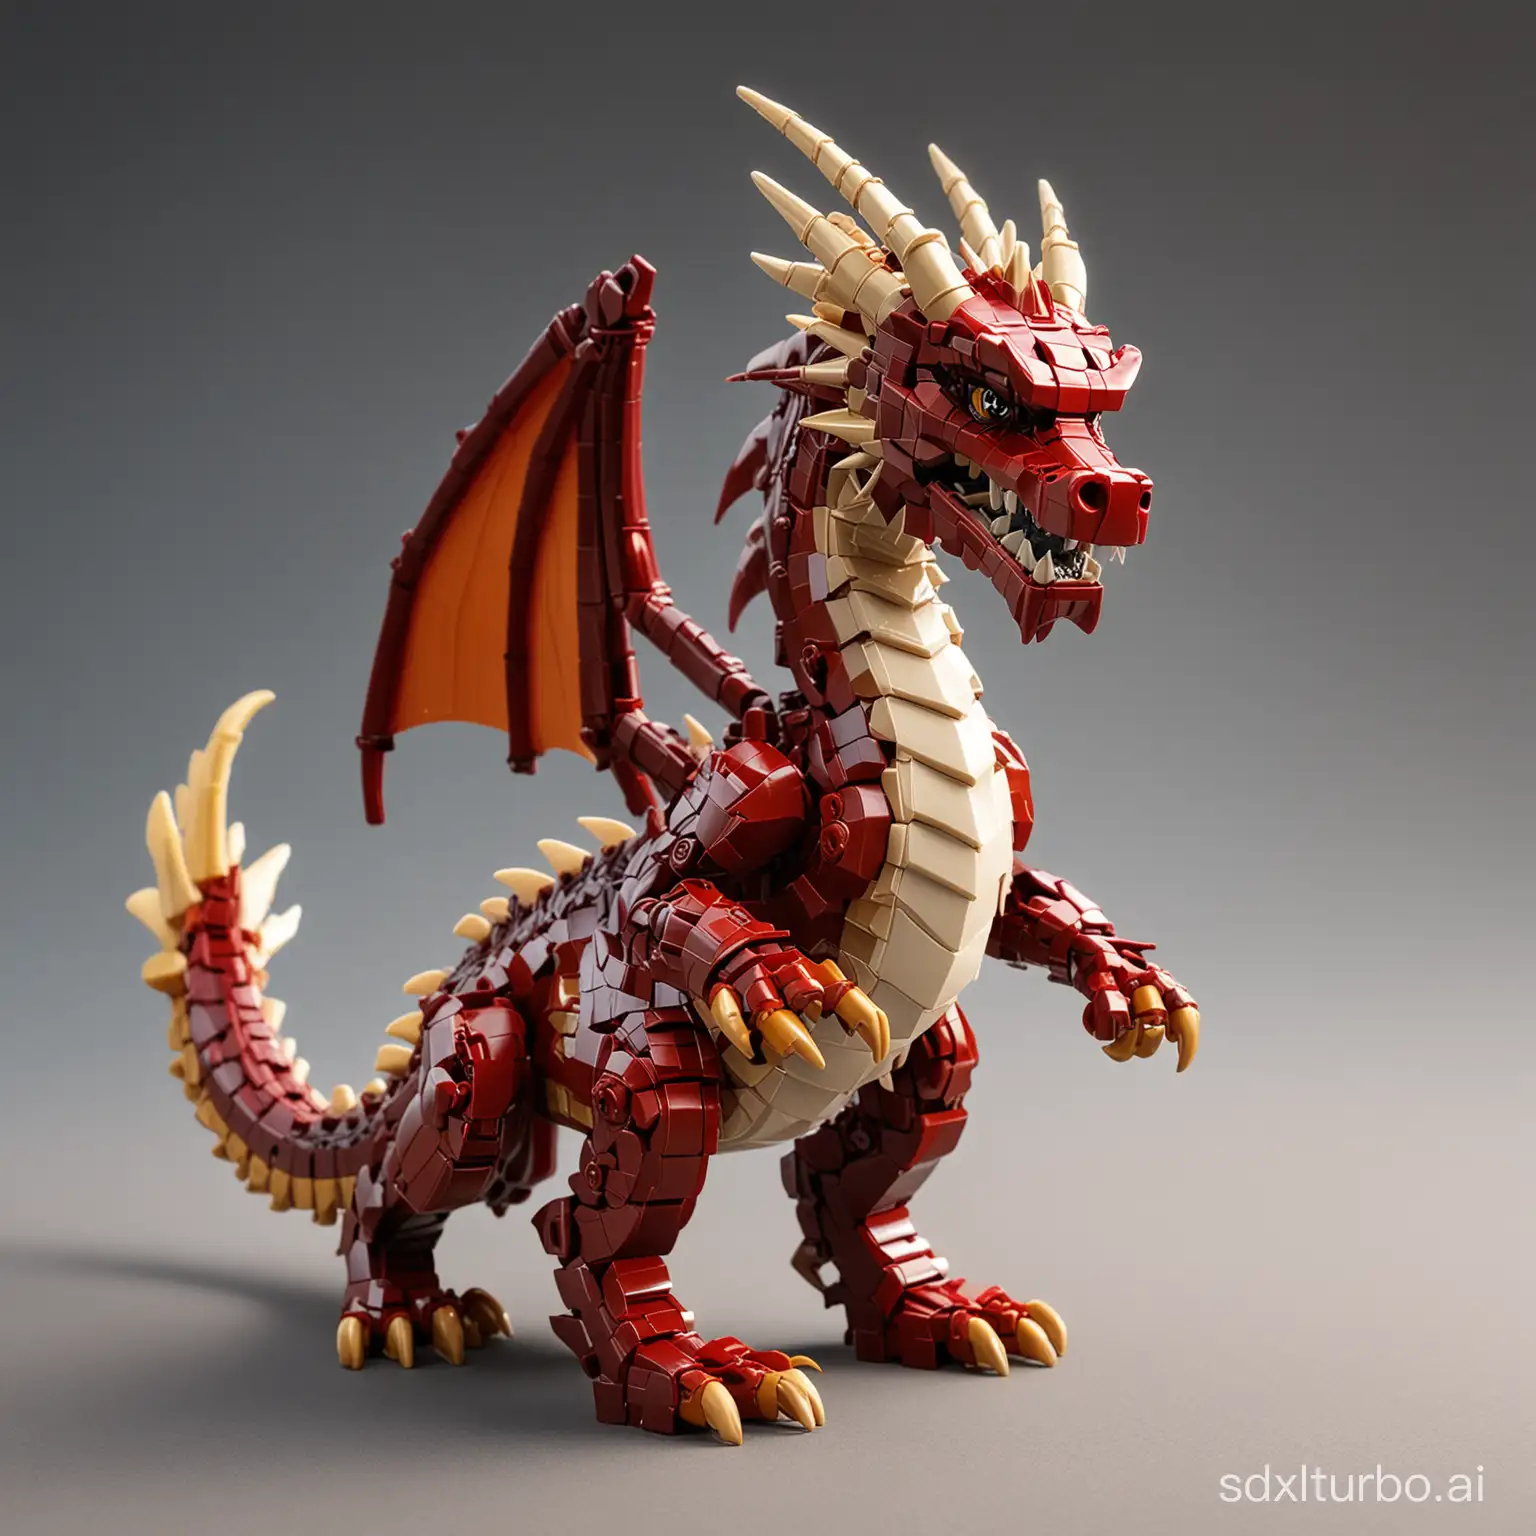 Epic-Dragon-Warrior-Constructed-from-LEGO